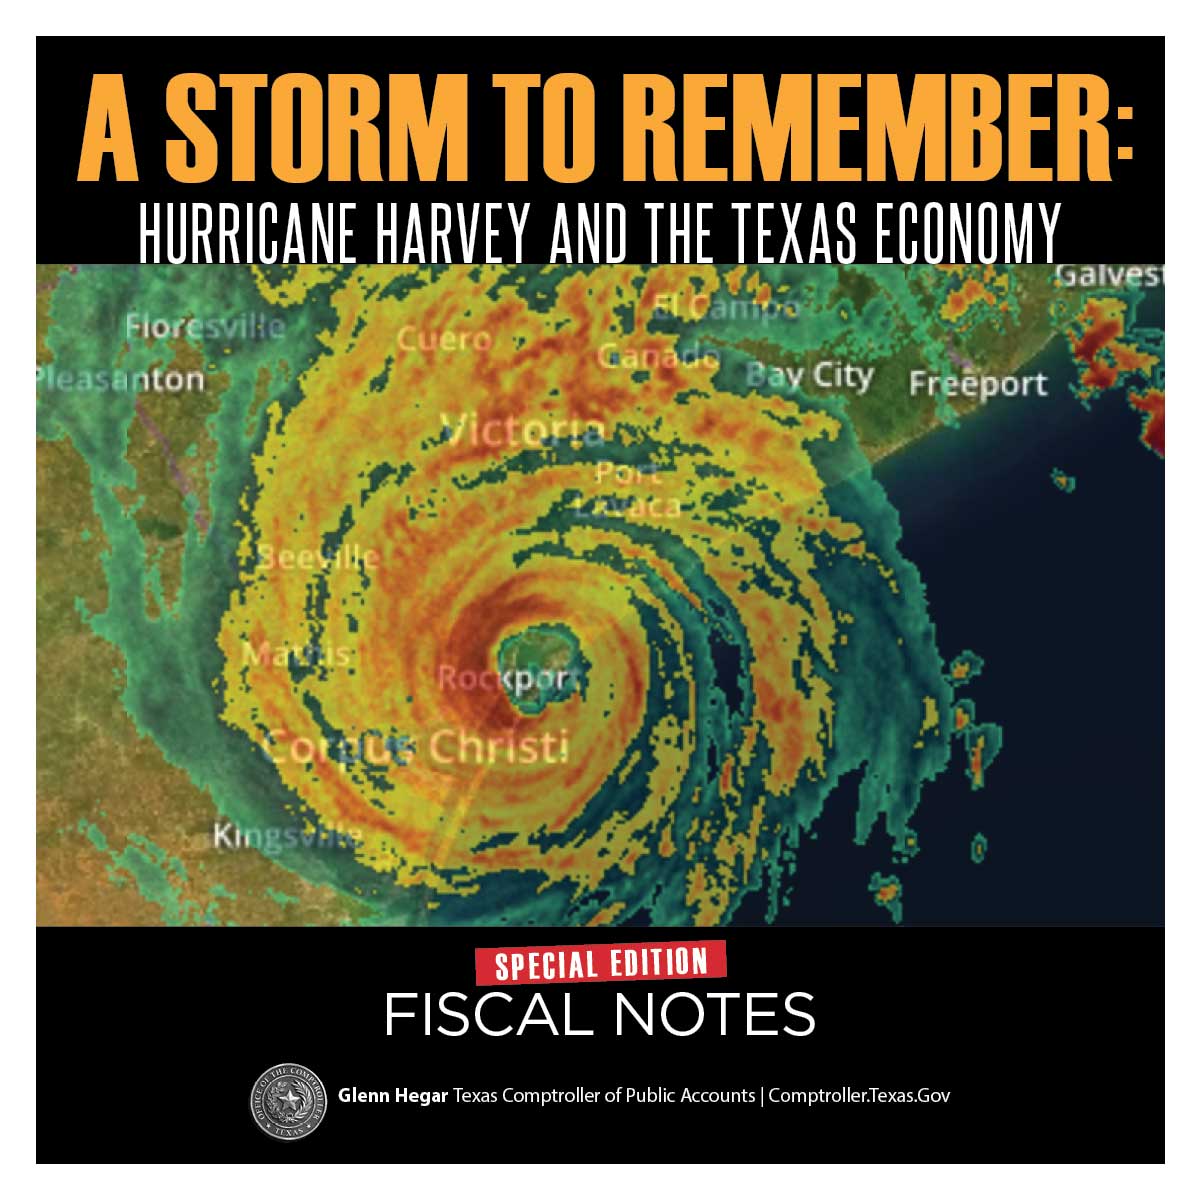 Fiscal Notes Special Edition - A Storm to Remember: Hurricane Harvey and the Texas Economy